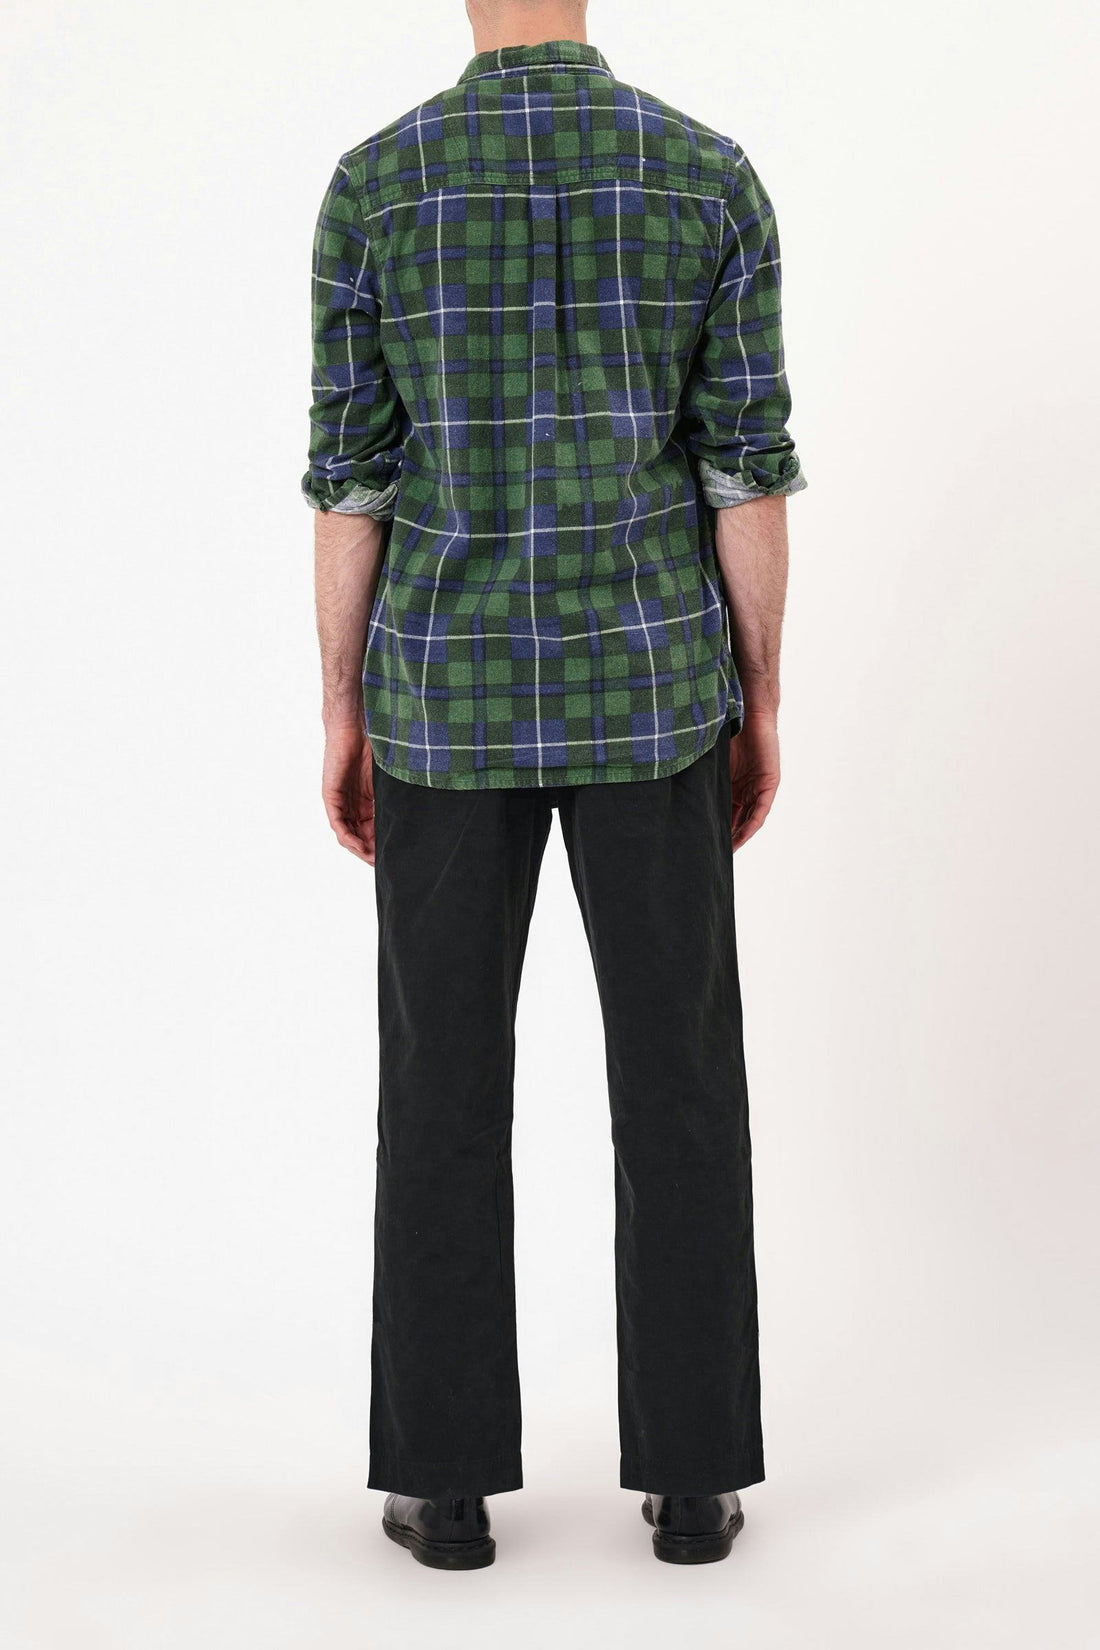 ROLLAS - Check Flannel Shirt in Emerald